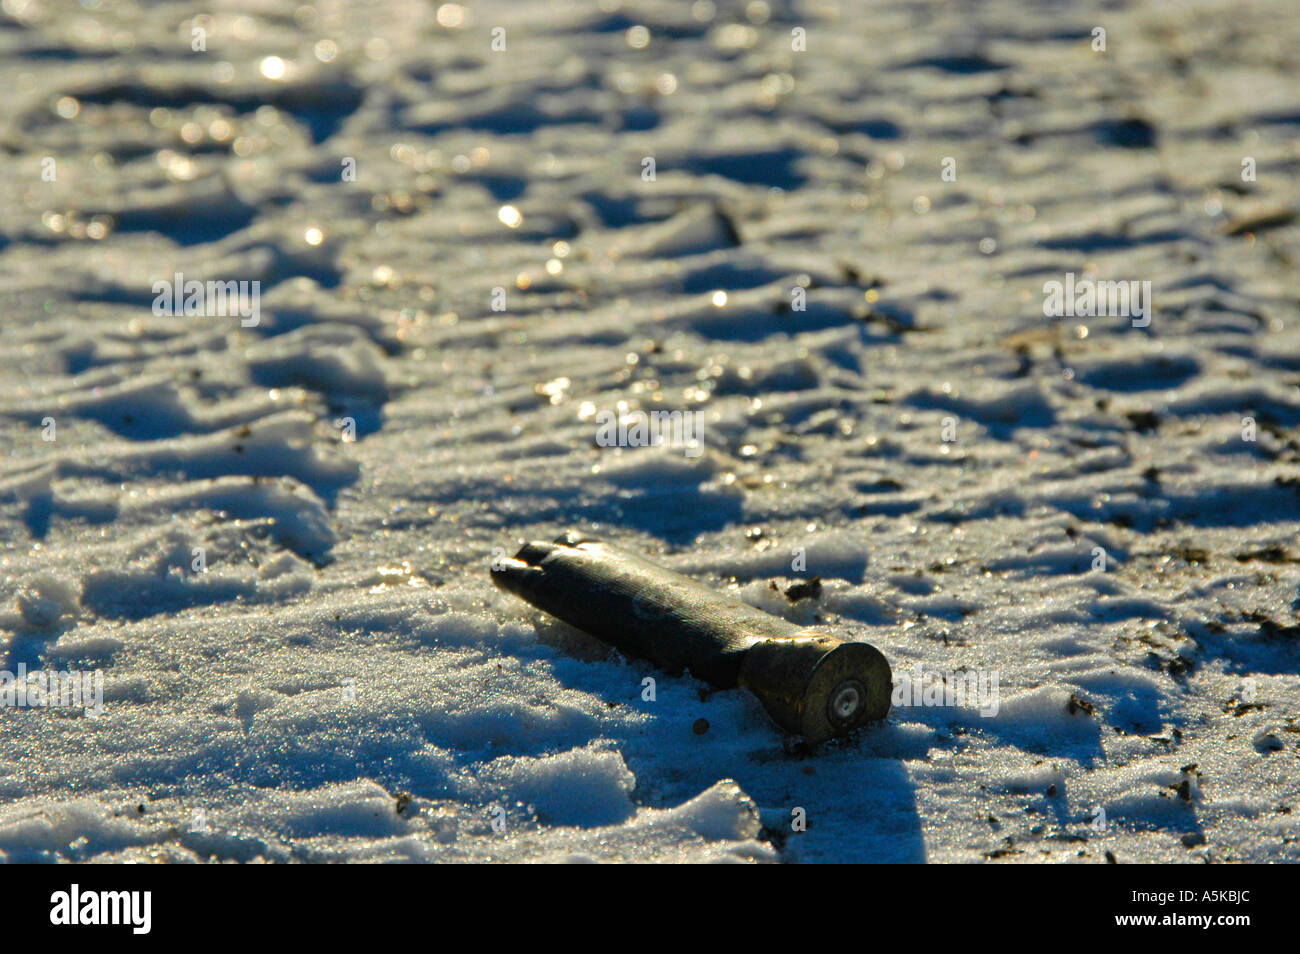 A stepped on Lead Shot shell in the snow Stock Photo